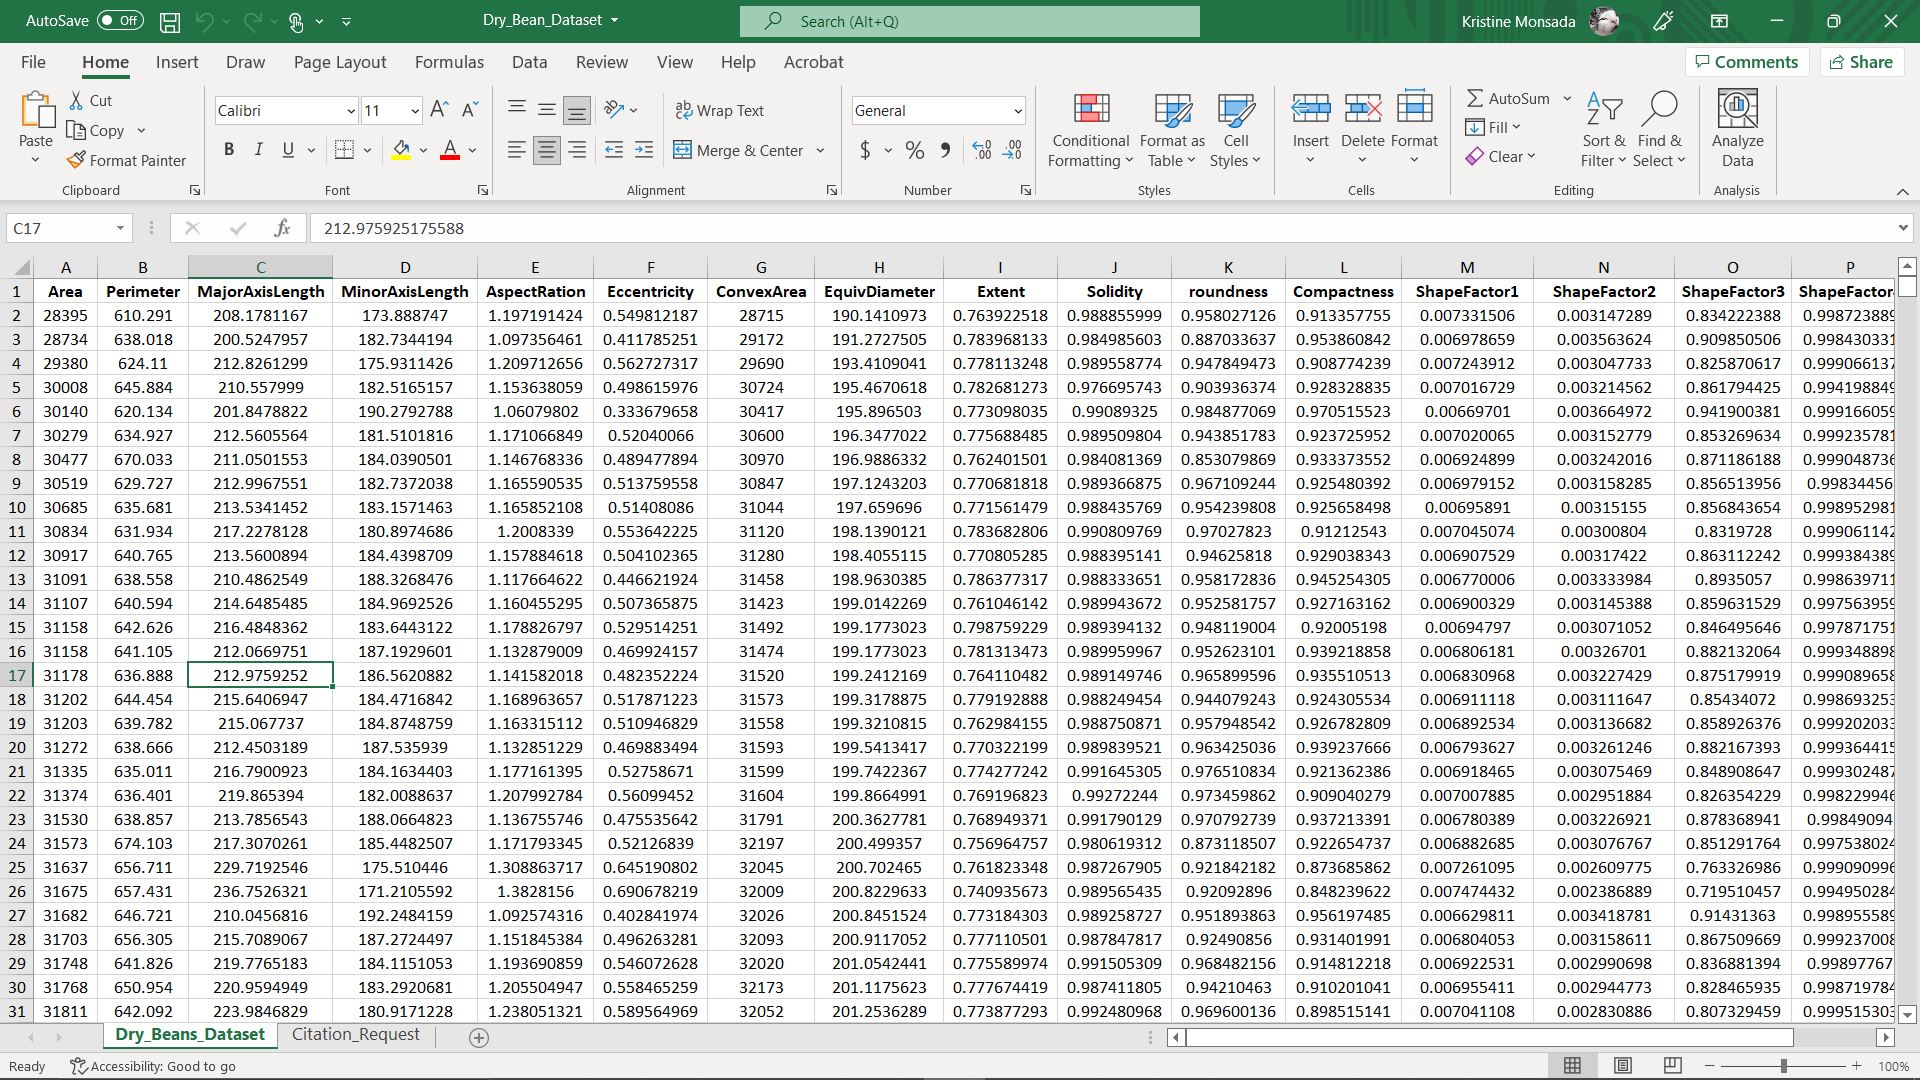 Screenshot of Mircosoft Excel, referencing a Dry Bean Dataset